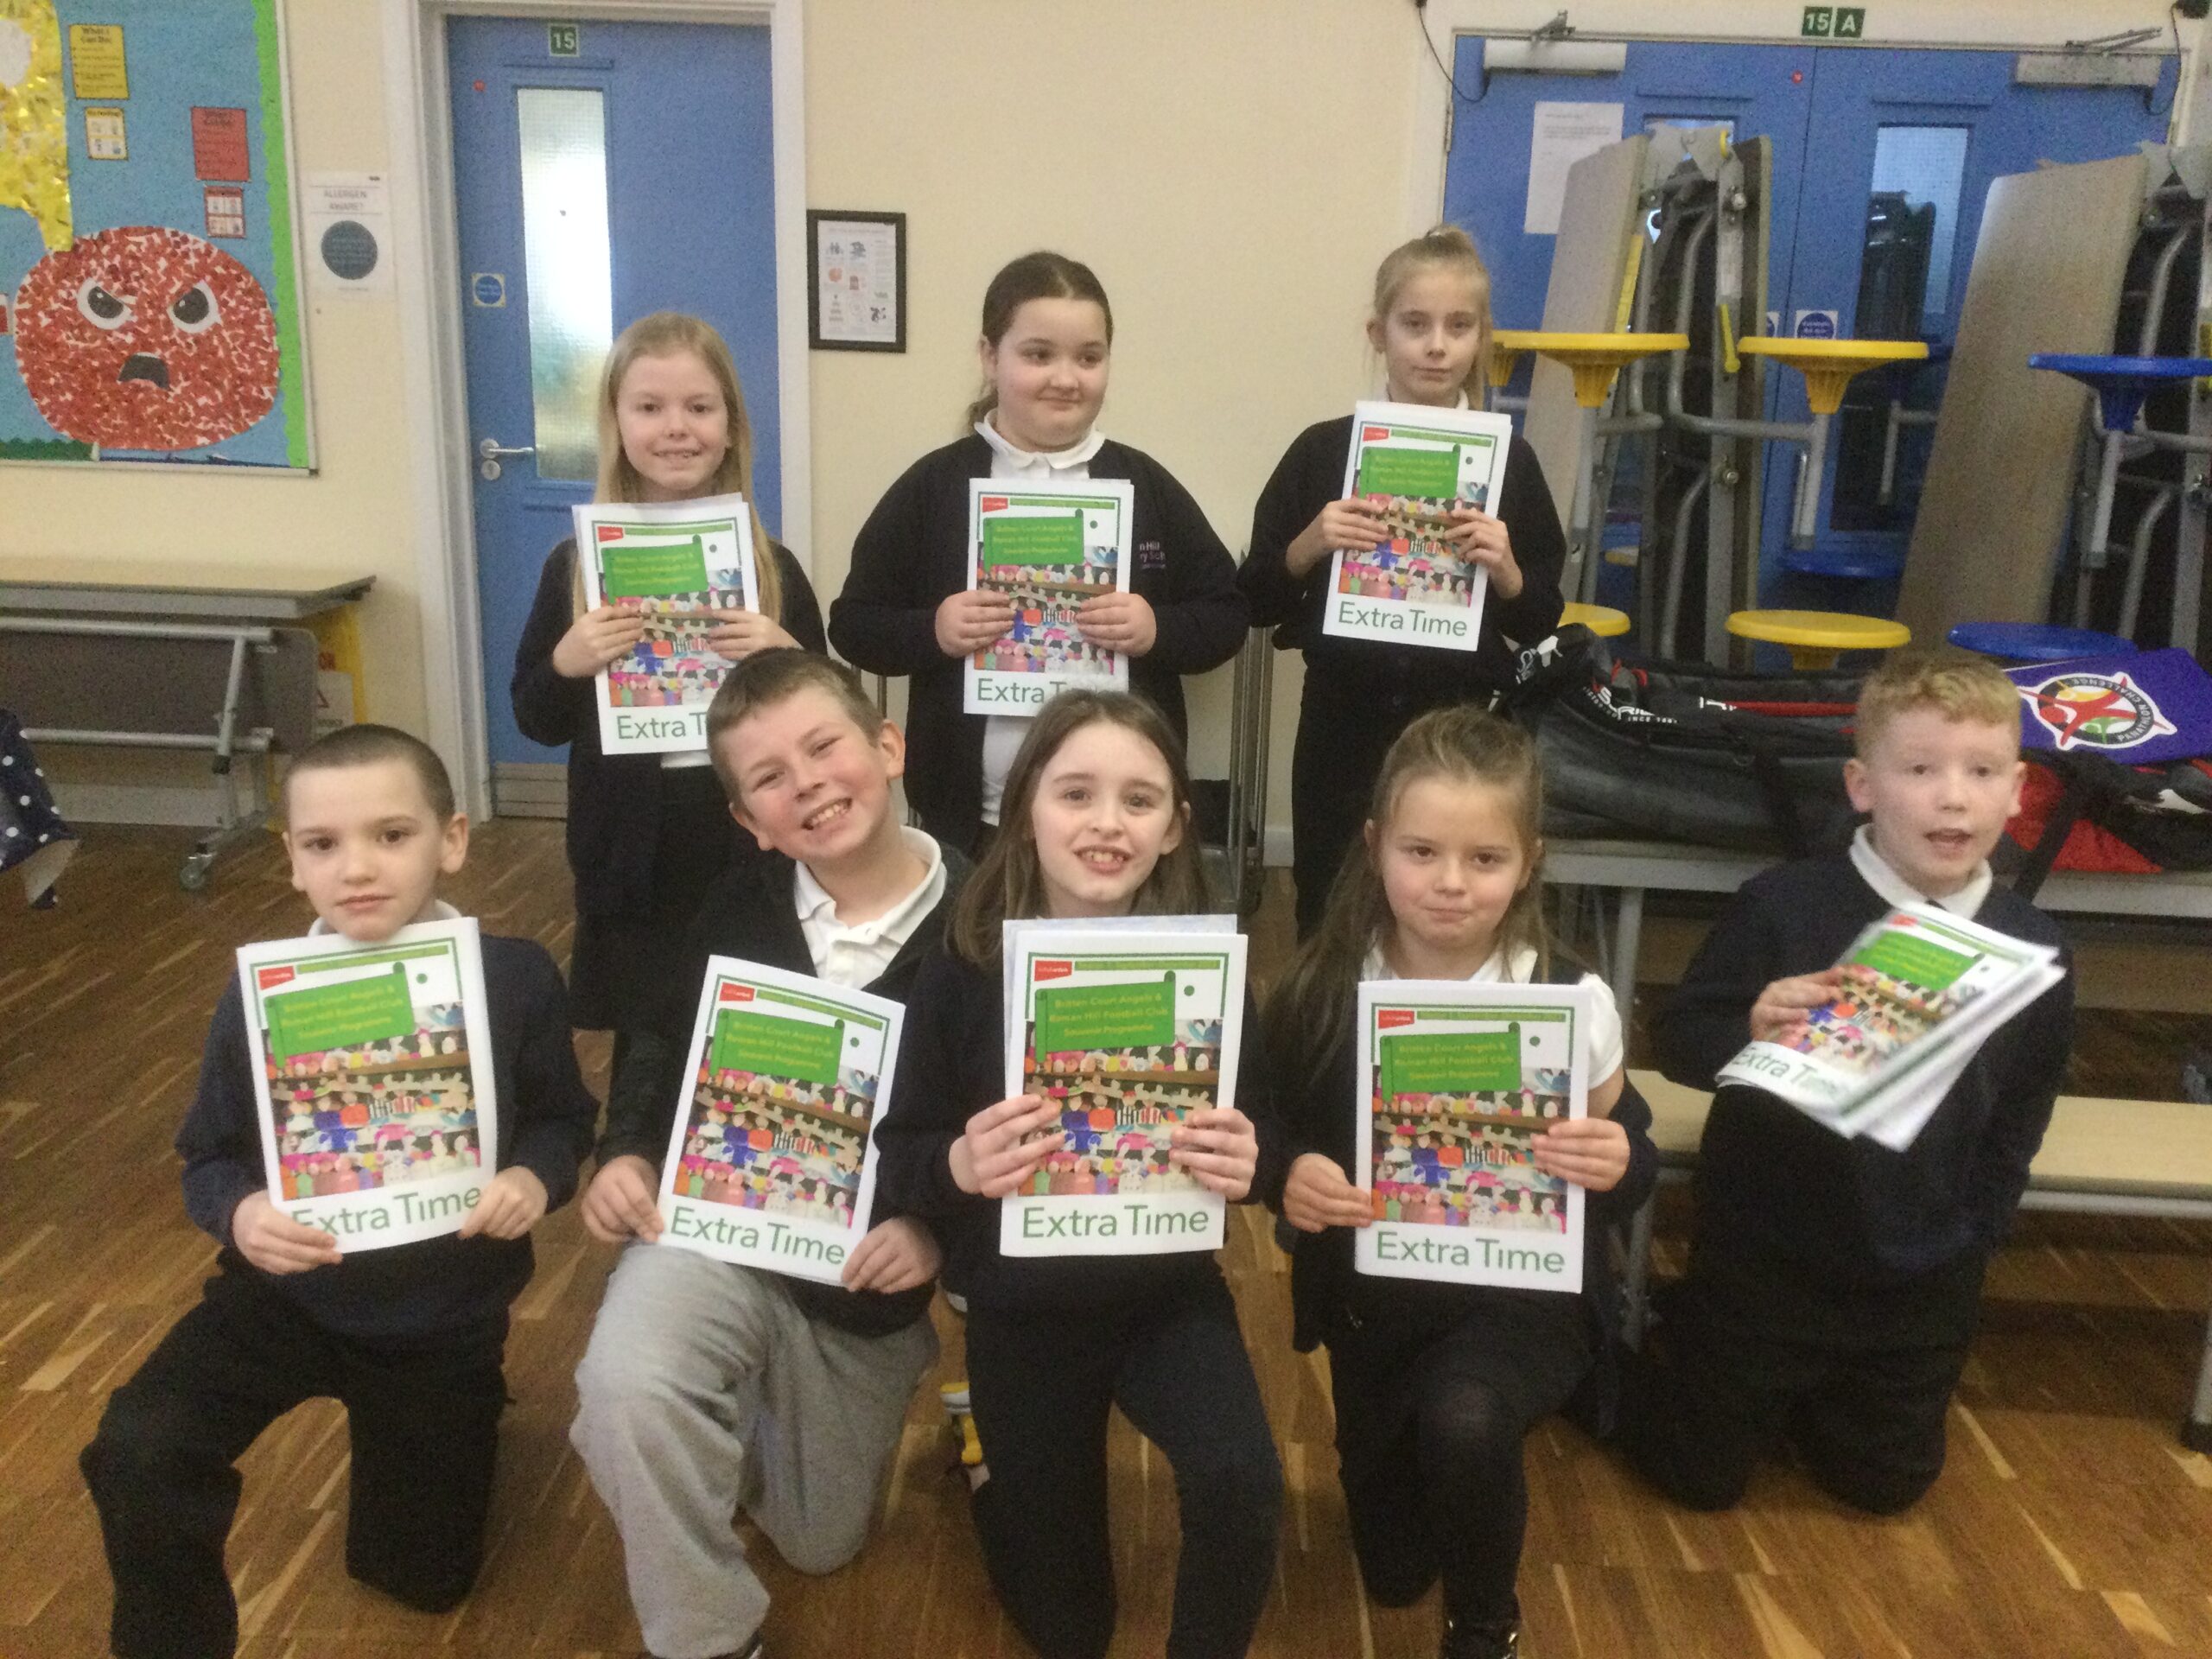 A group of 8 children smiling at the camera and holding their copies of the Extra Time Souvenir Programme